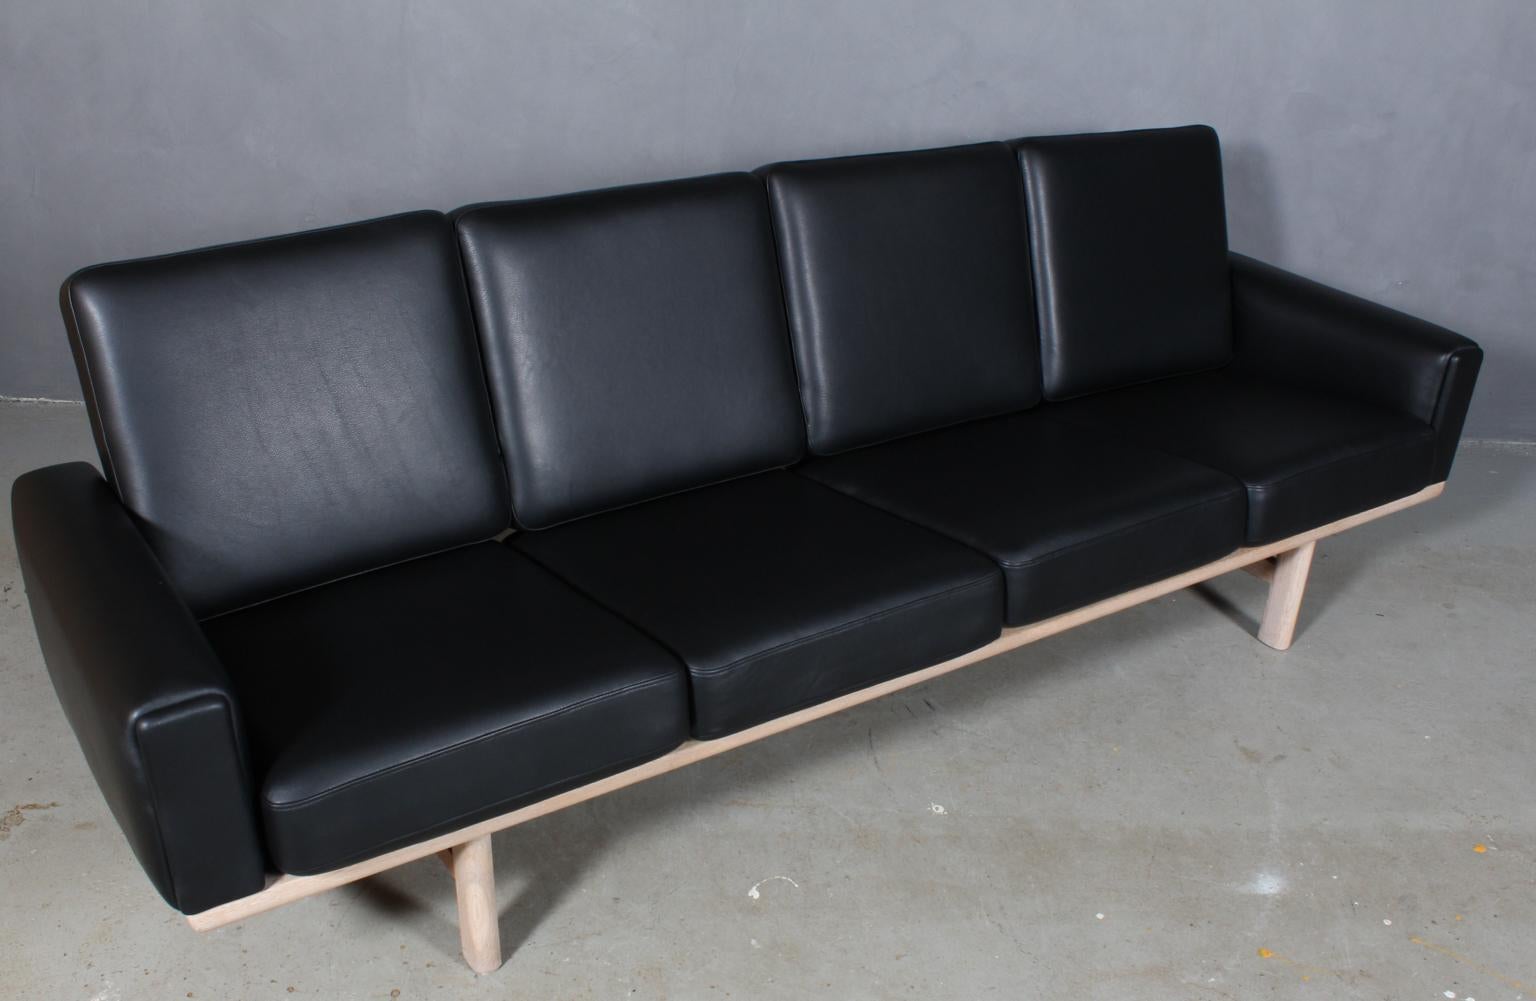 Hans J. Wegner four-seat sofa new upholstered with pure aniline leather.
Original Epeda cushions.

Frame in solid soap treated oak.

Model 236/4, produced by GETAMA.